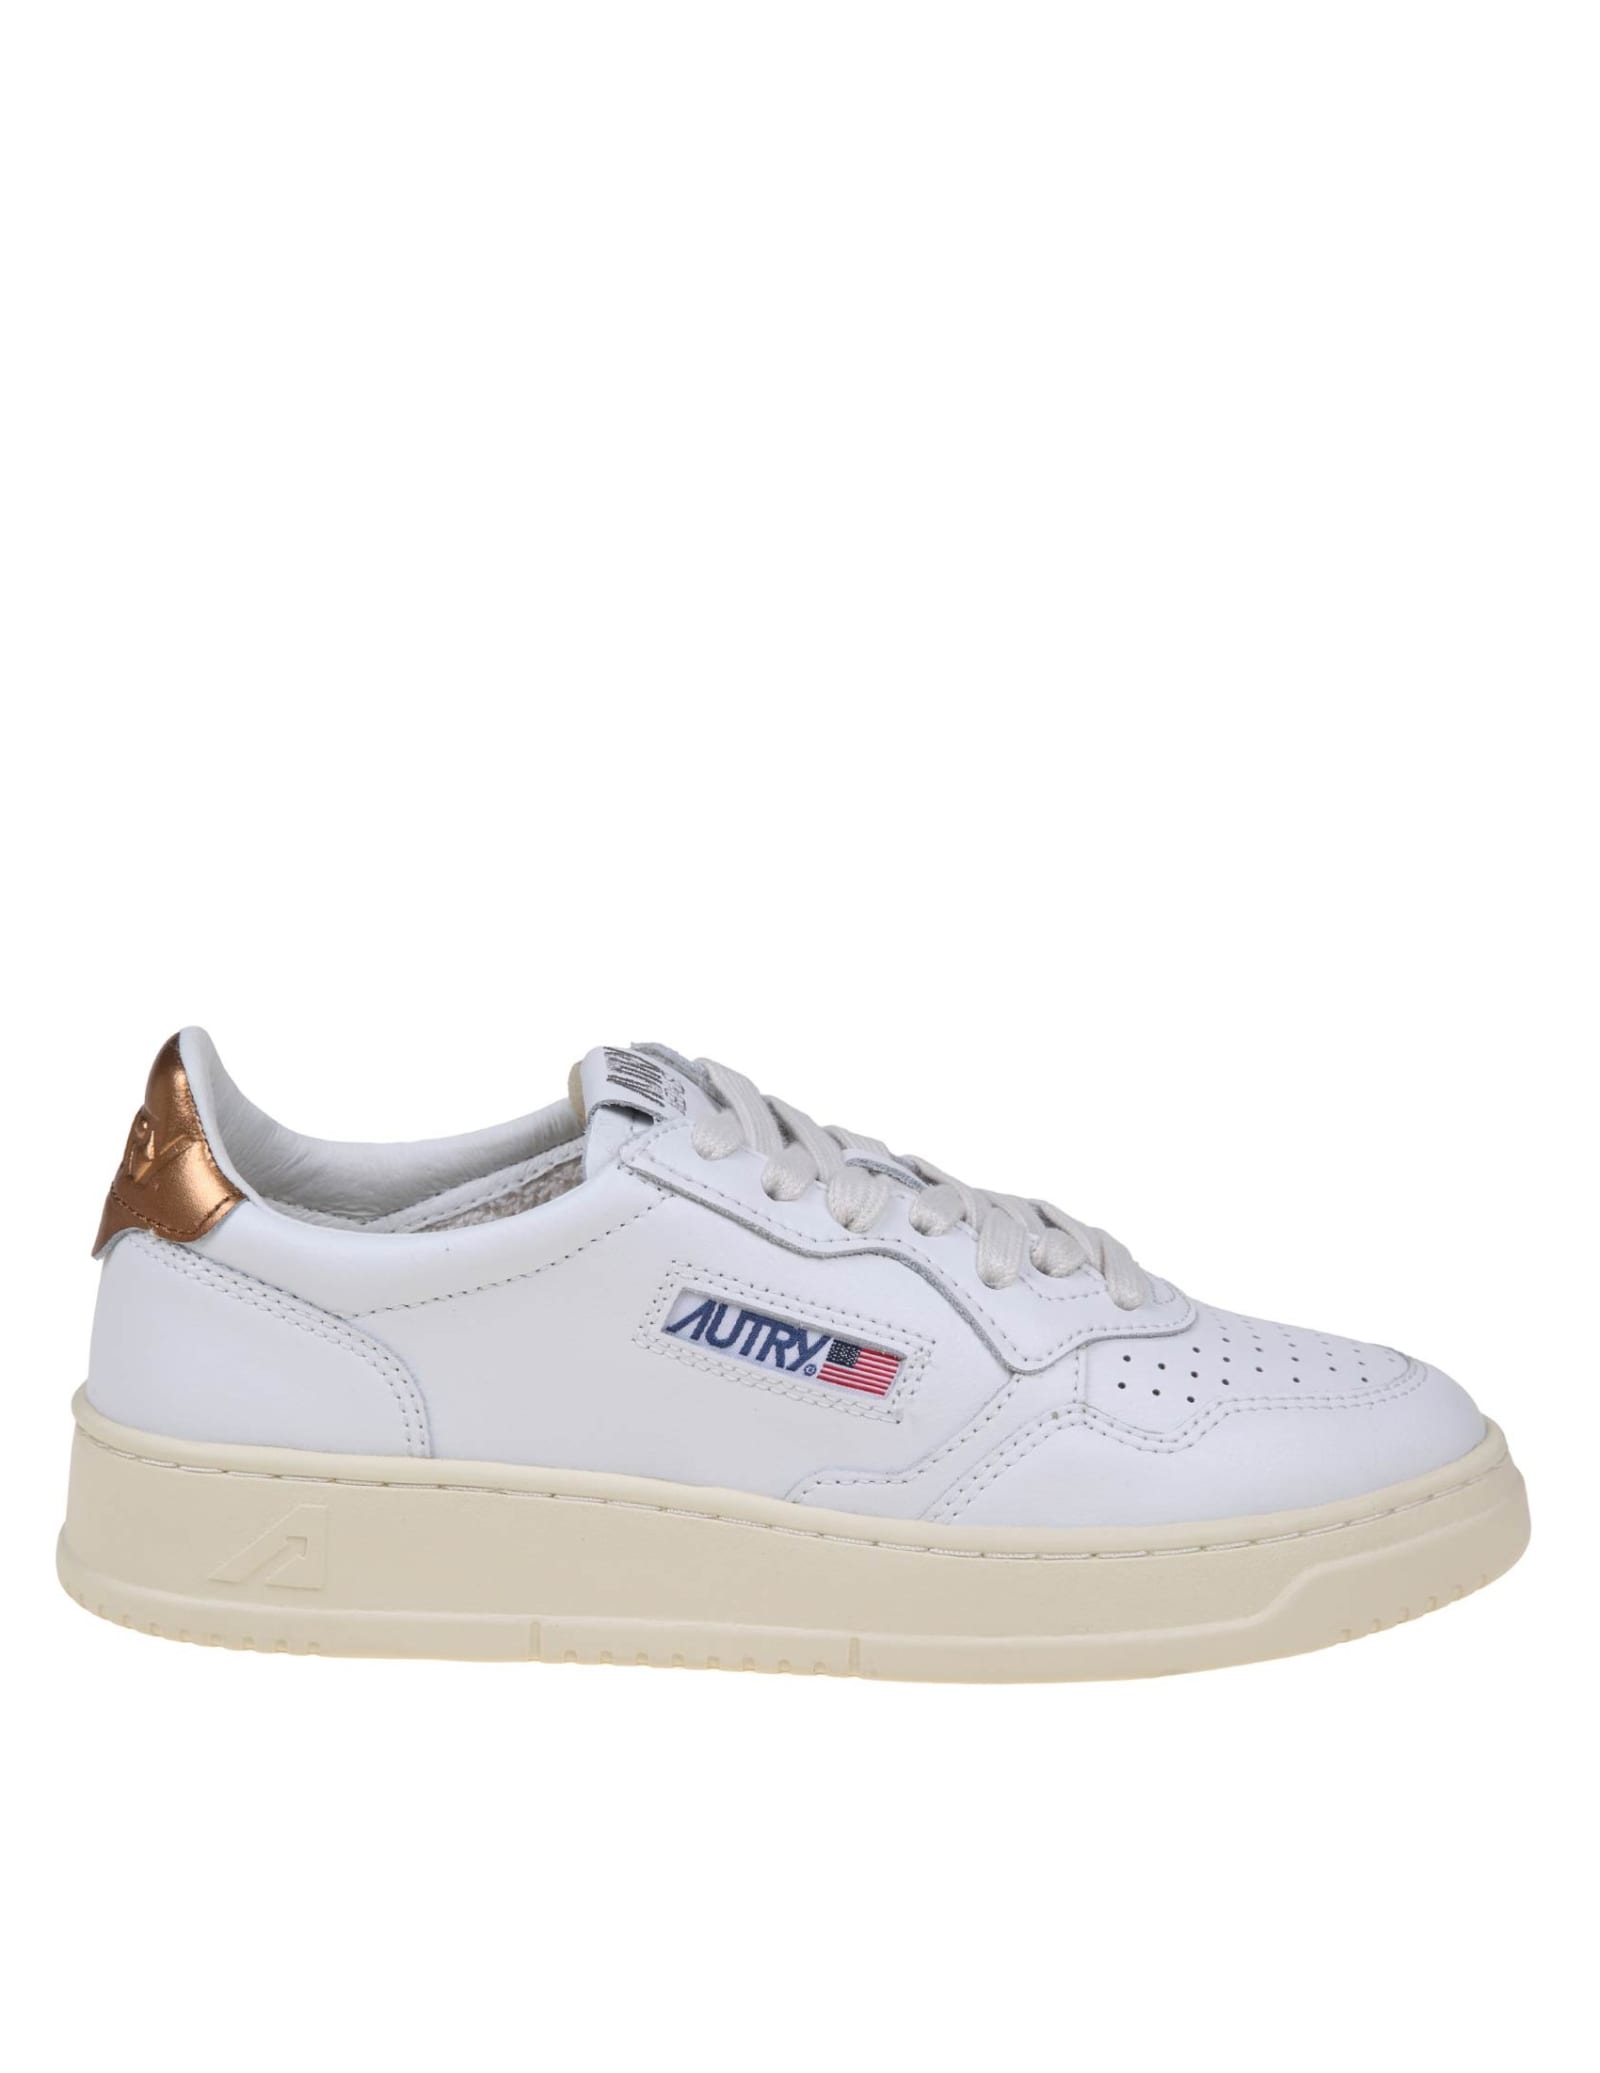 Shop Autry Sneakers In White And Bronze Leather